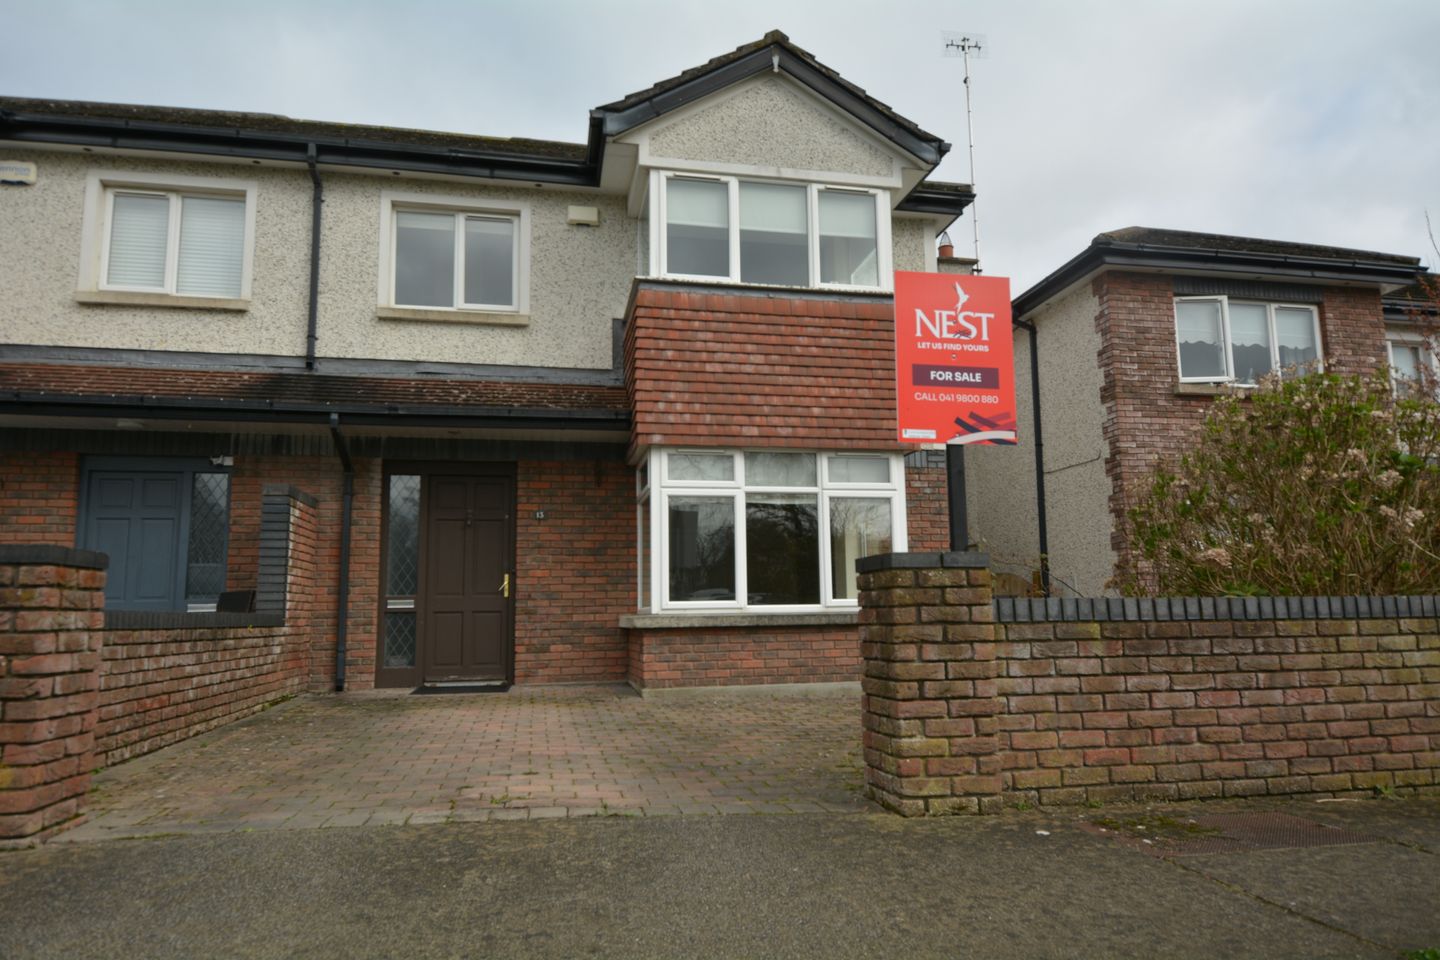 13 Parkwood, Roschoill, Drogheda, Co. Louth, A92Y1KP